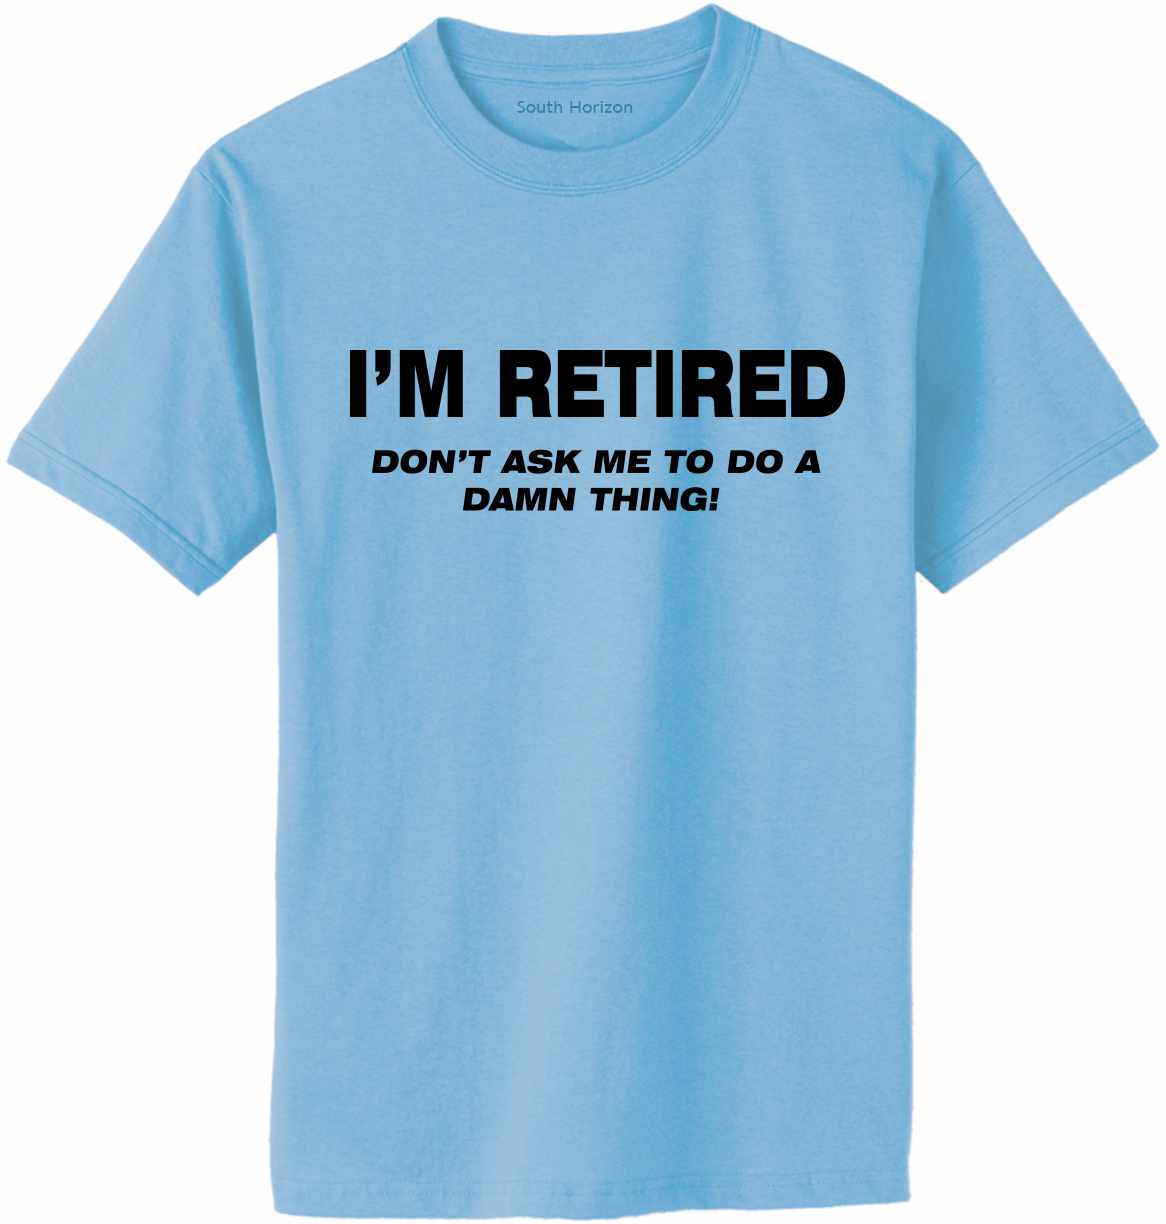 I'M RETIRED Don't Ask Me To Do A Damn Thing Adult T-Shirt (#833-1)